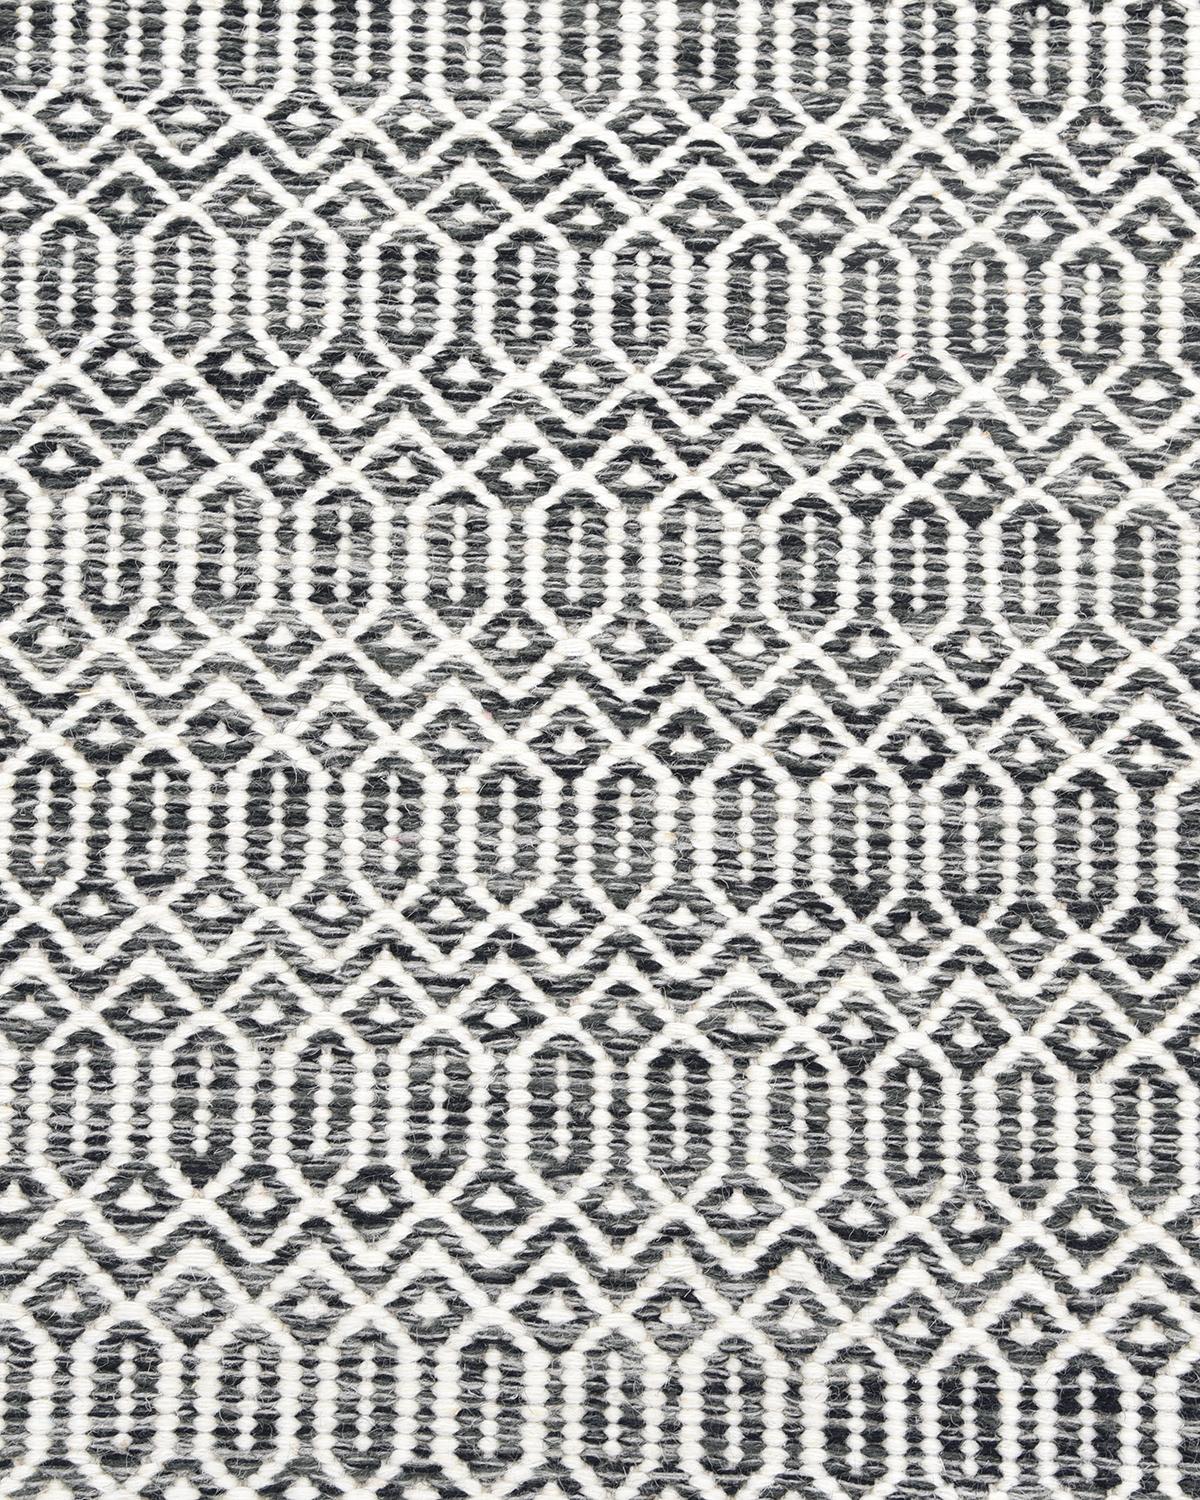 Indian Solo Rugs Flatweave Geometric Hand Woven Gray Area Rug For Sale